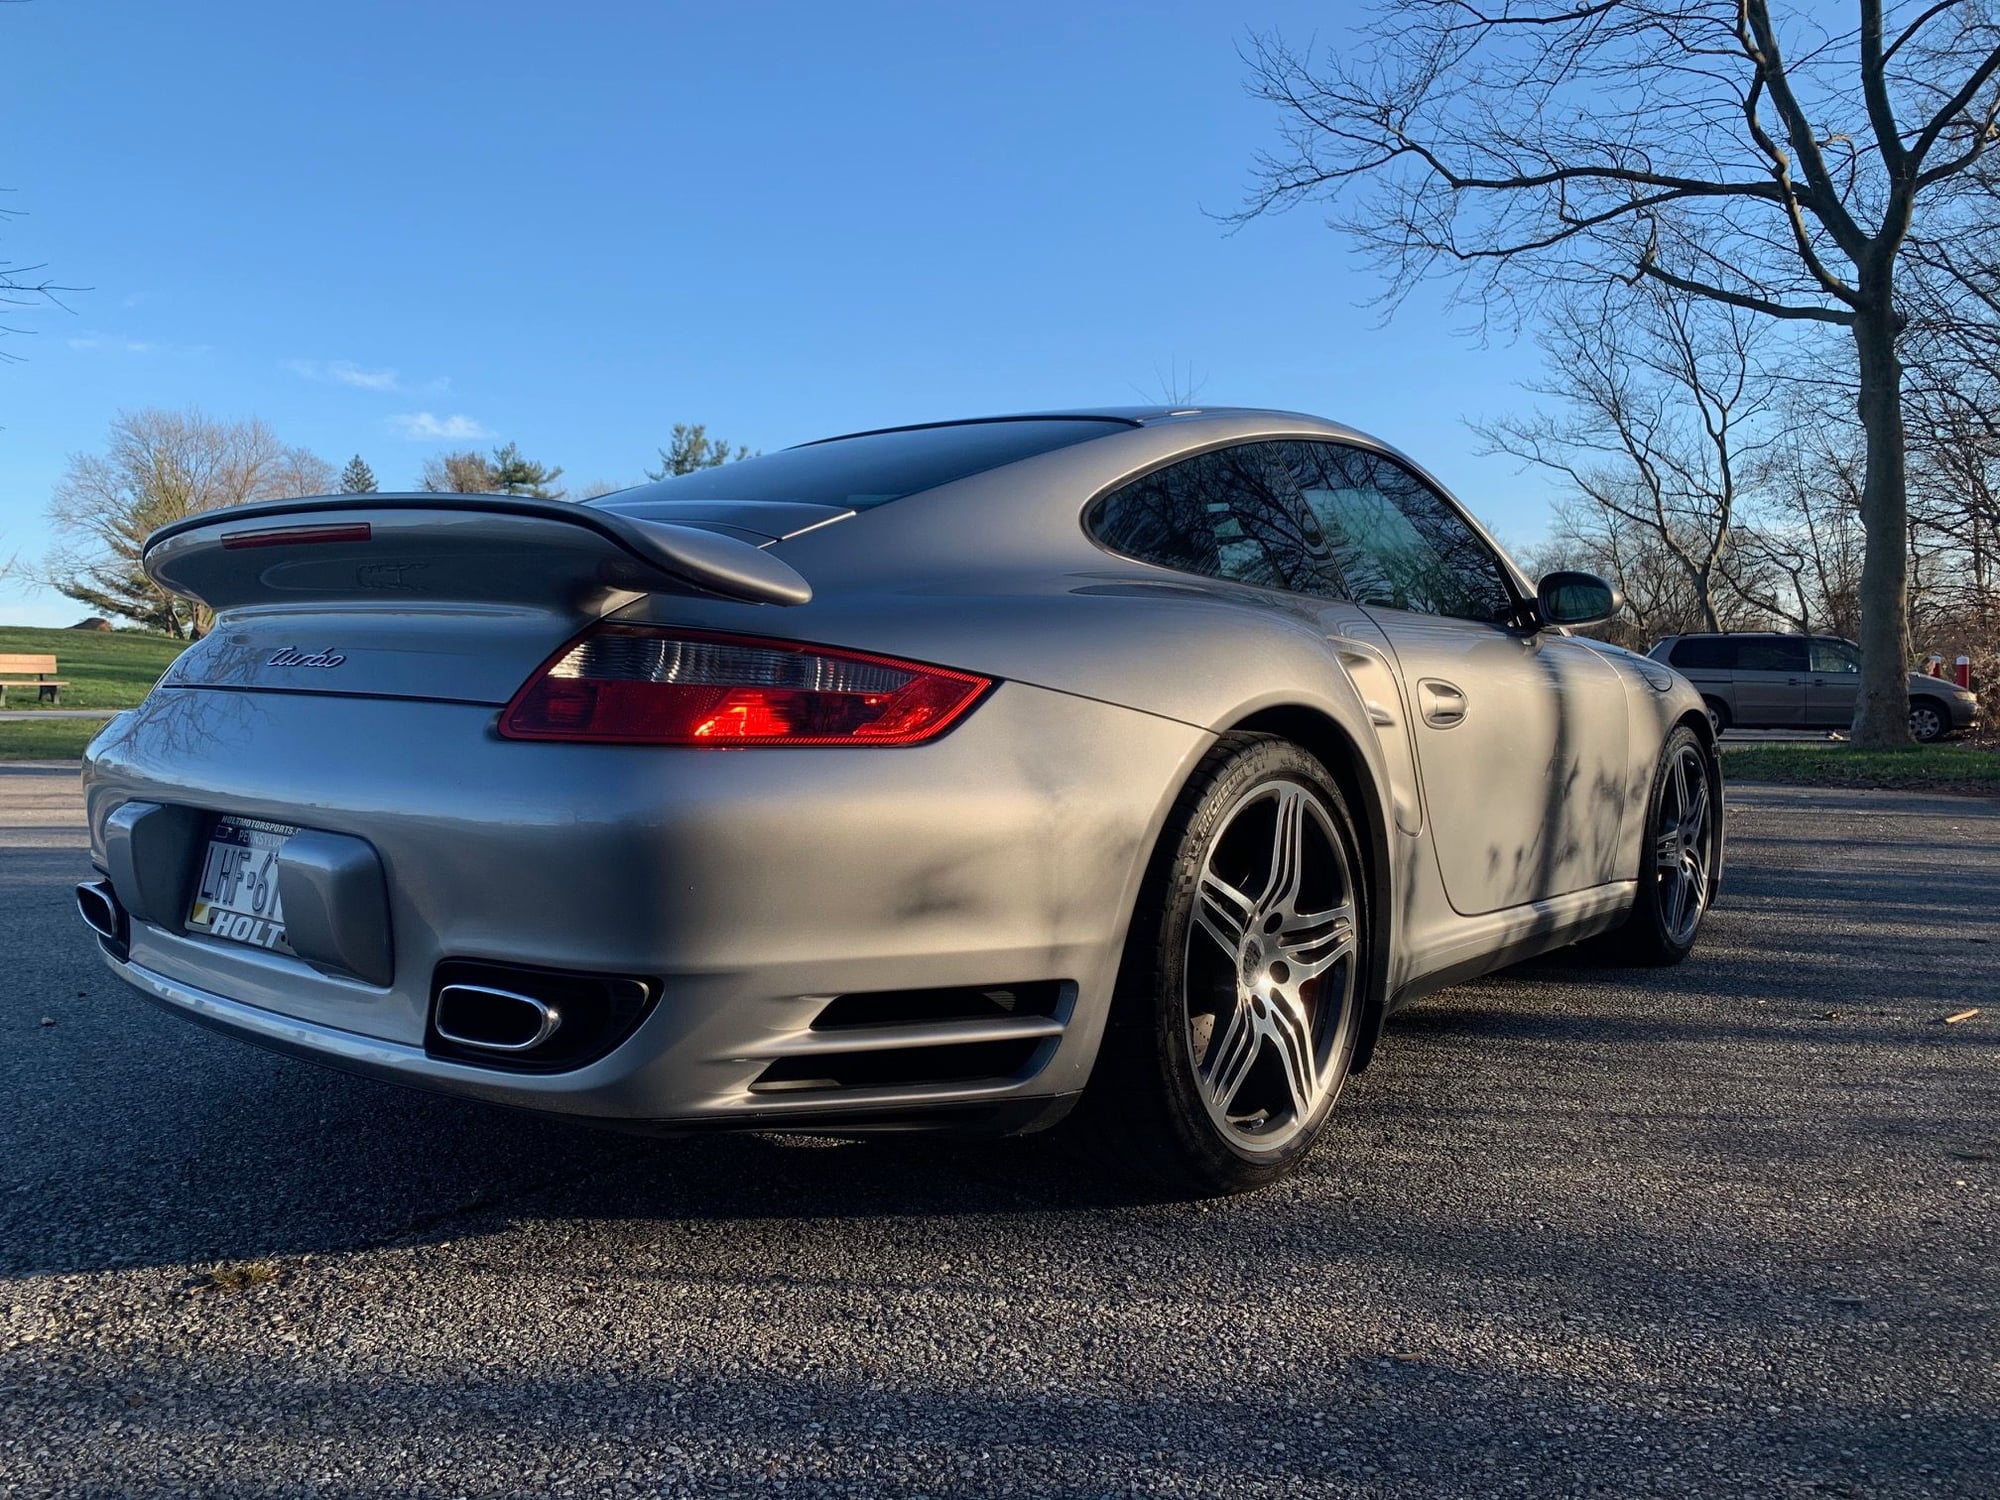 2008 Porsche 911 - 2008 911 Turbo 6-Speed Manual - 29.7k Miles - Stock -  GT Silver on Cocoa - Used - VIN WP0AD29938S783501 - 29,750 Miles - 6 cyl - AWD - Manual - Coupe - Silver - West Chester, PA 19380, United States